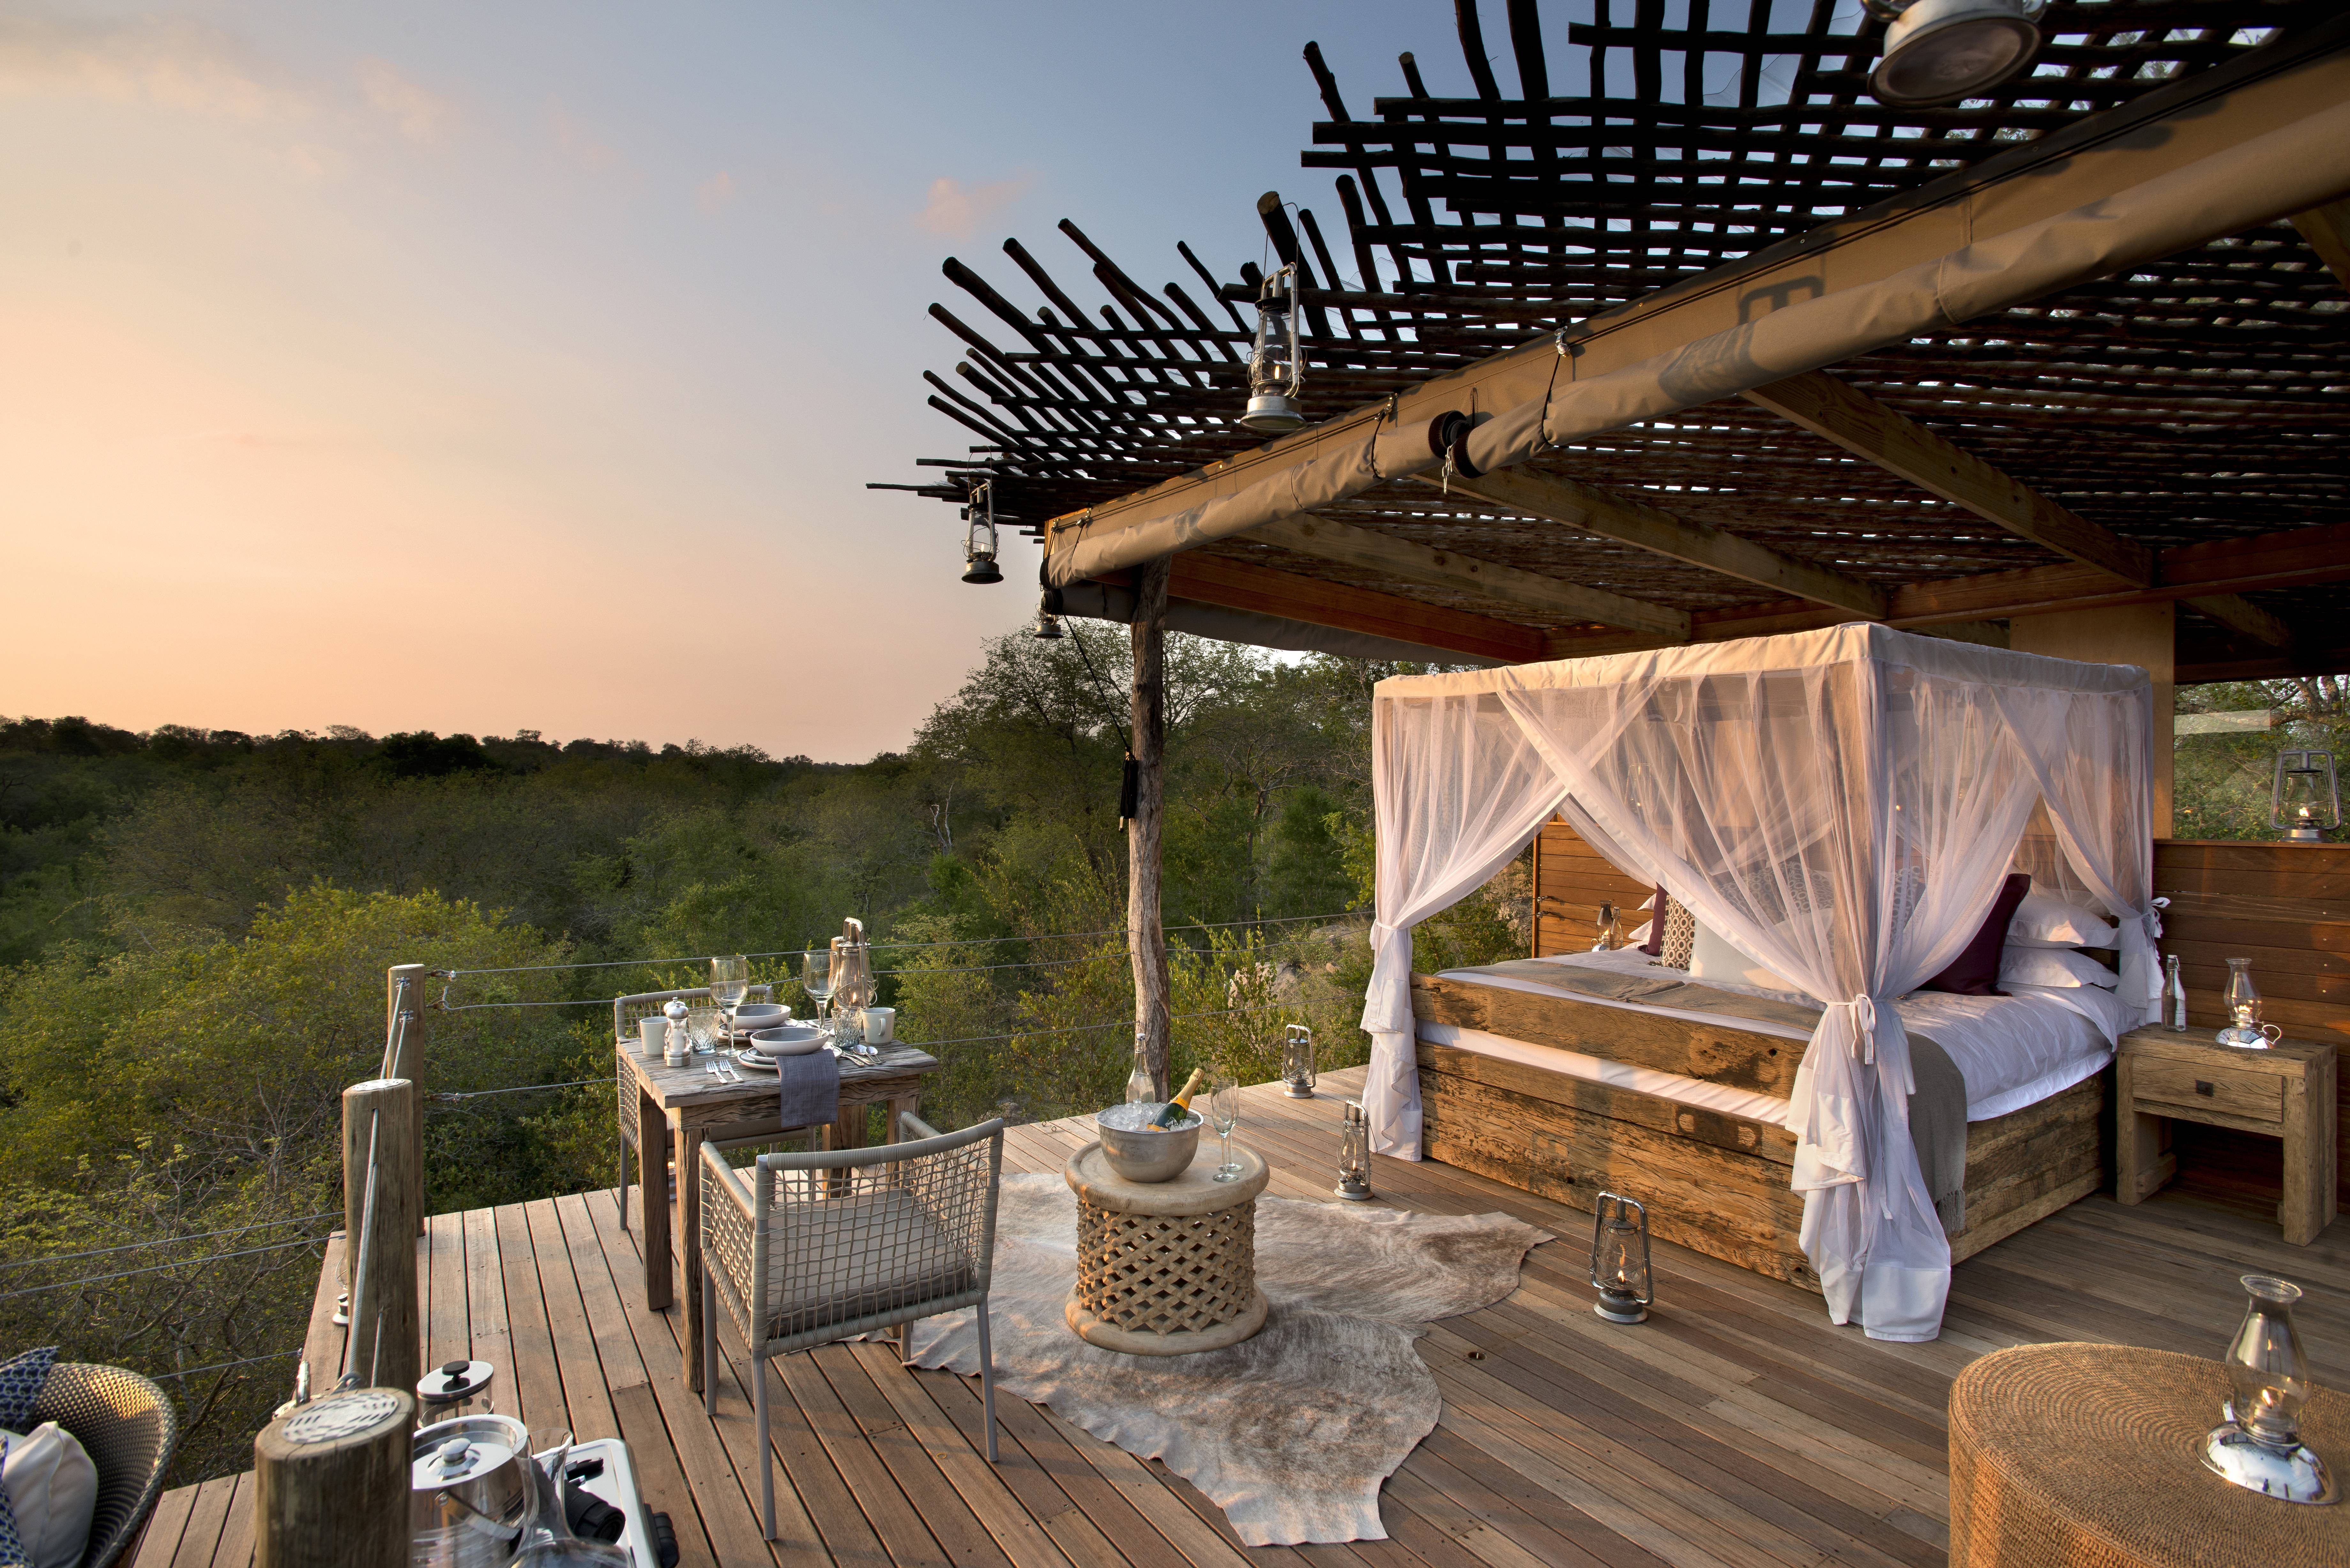 Lion Sands Reserve, South Africa, Hotel, Outdoors, Sunset, Nature, Bed, Candles Wallpaper